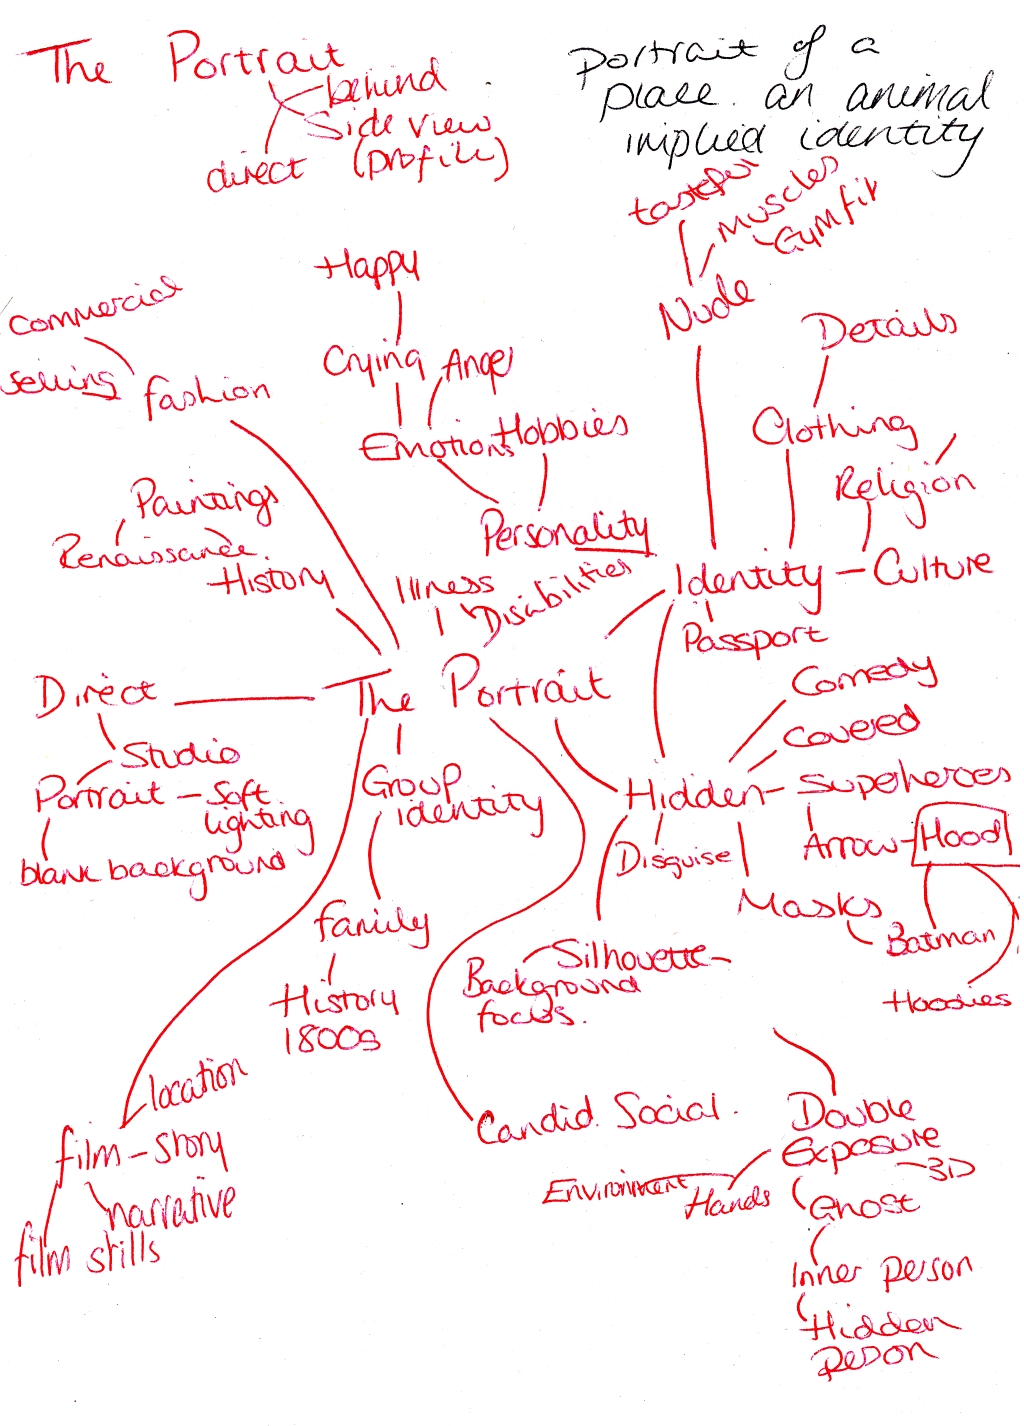 Initial Quick MIndmap under the direction of Portraiture